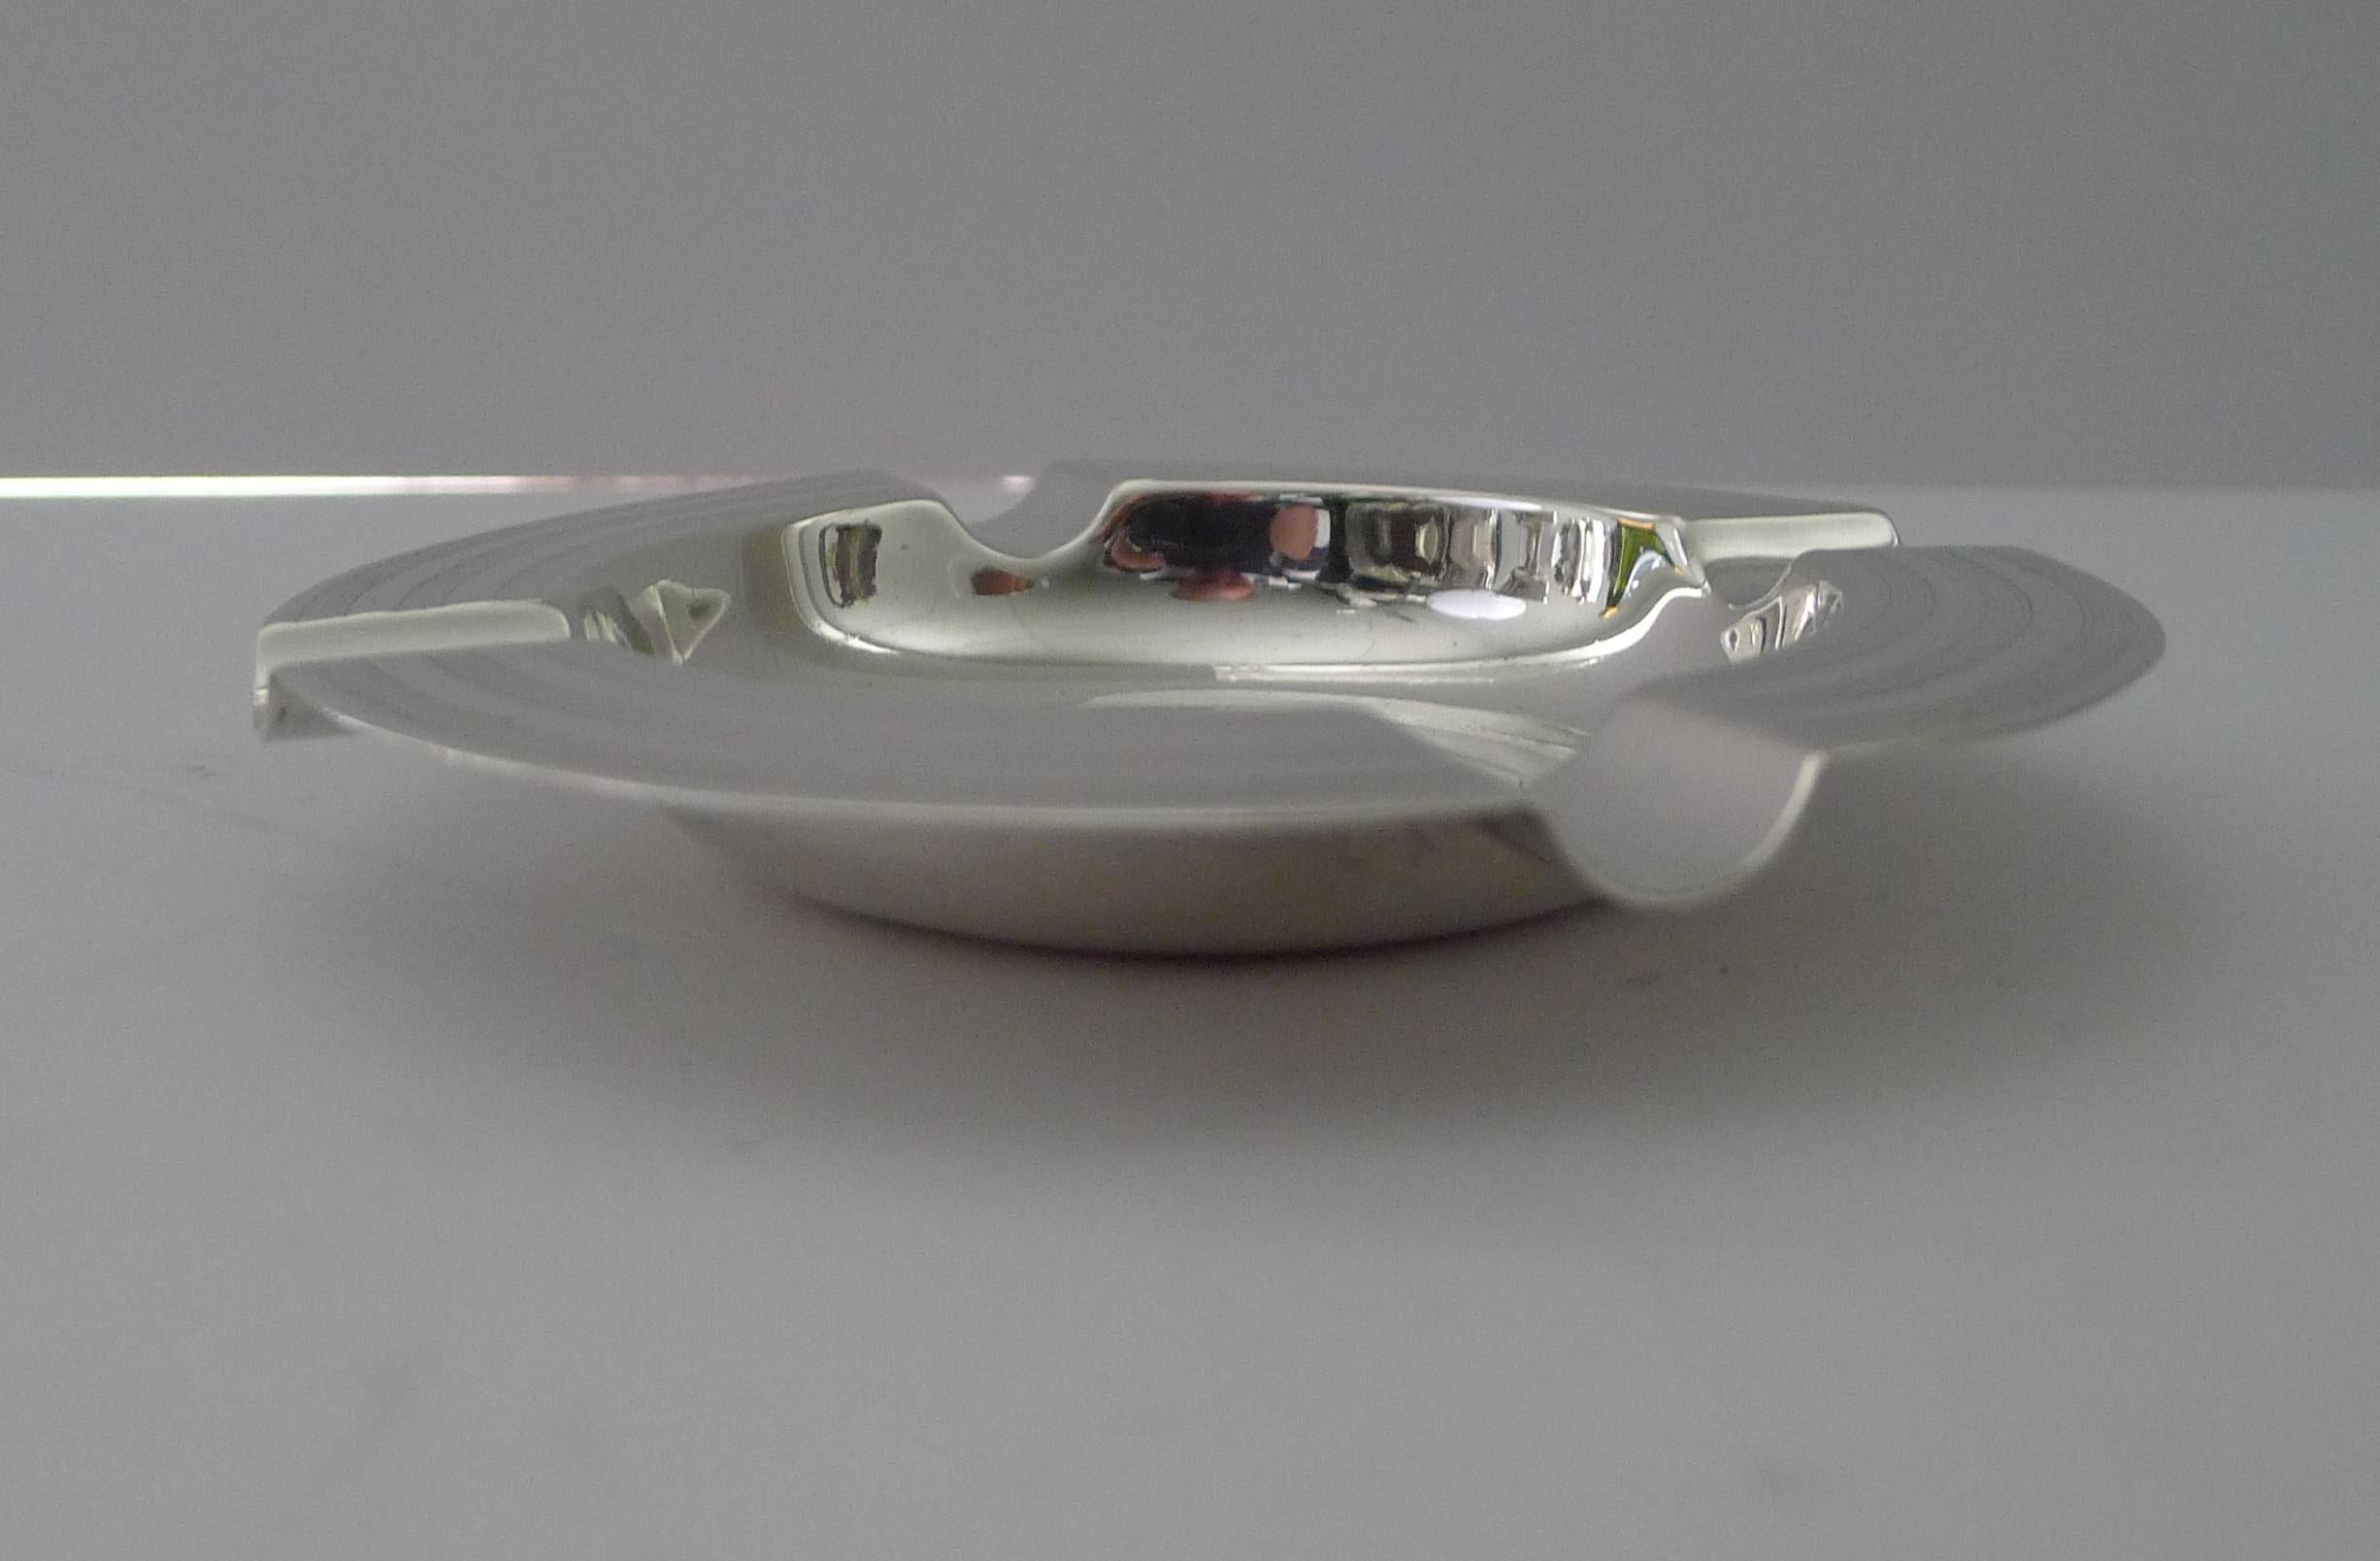 A magnificent Art Deco solid sterling silver ashtray made by one of the finest silversmith's, Goldsmiths and Silversmiths Co. Ltd; fully signed on the underside with the London address 